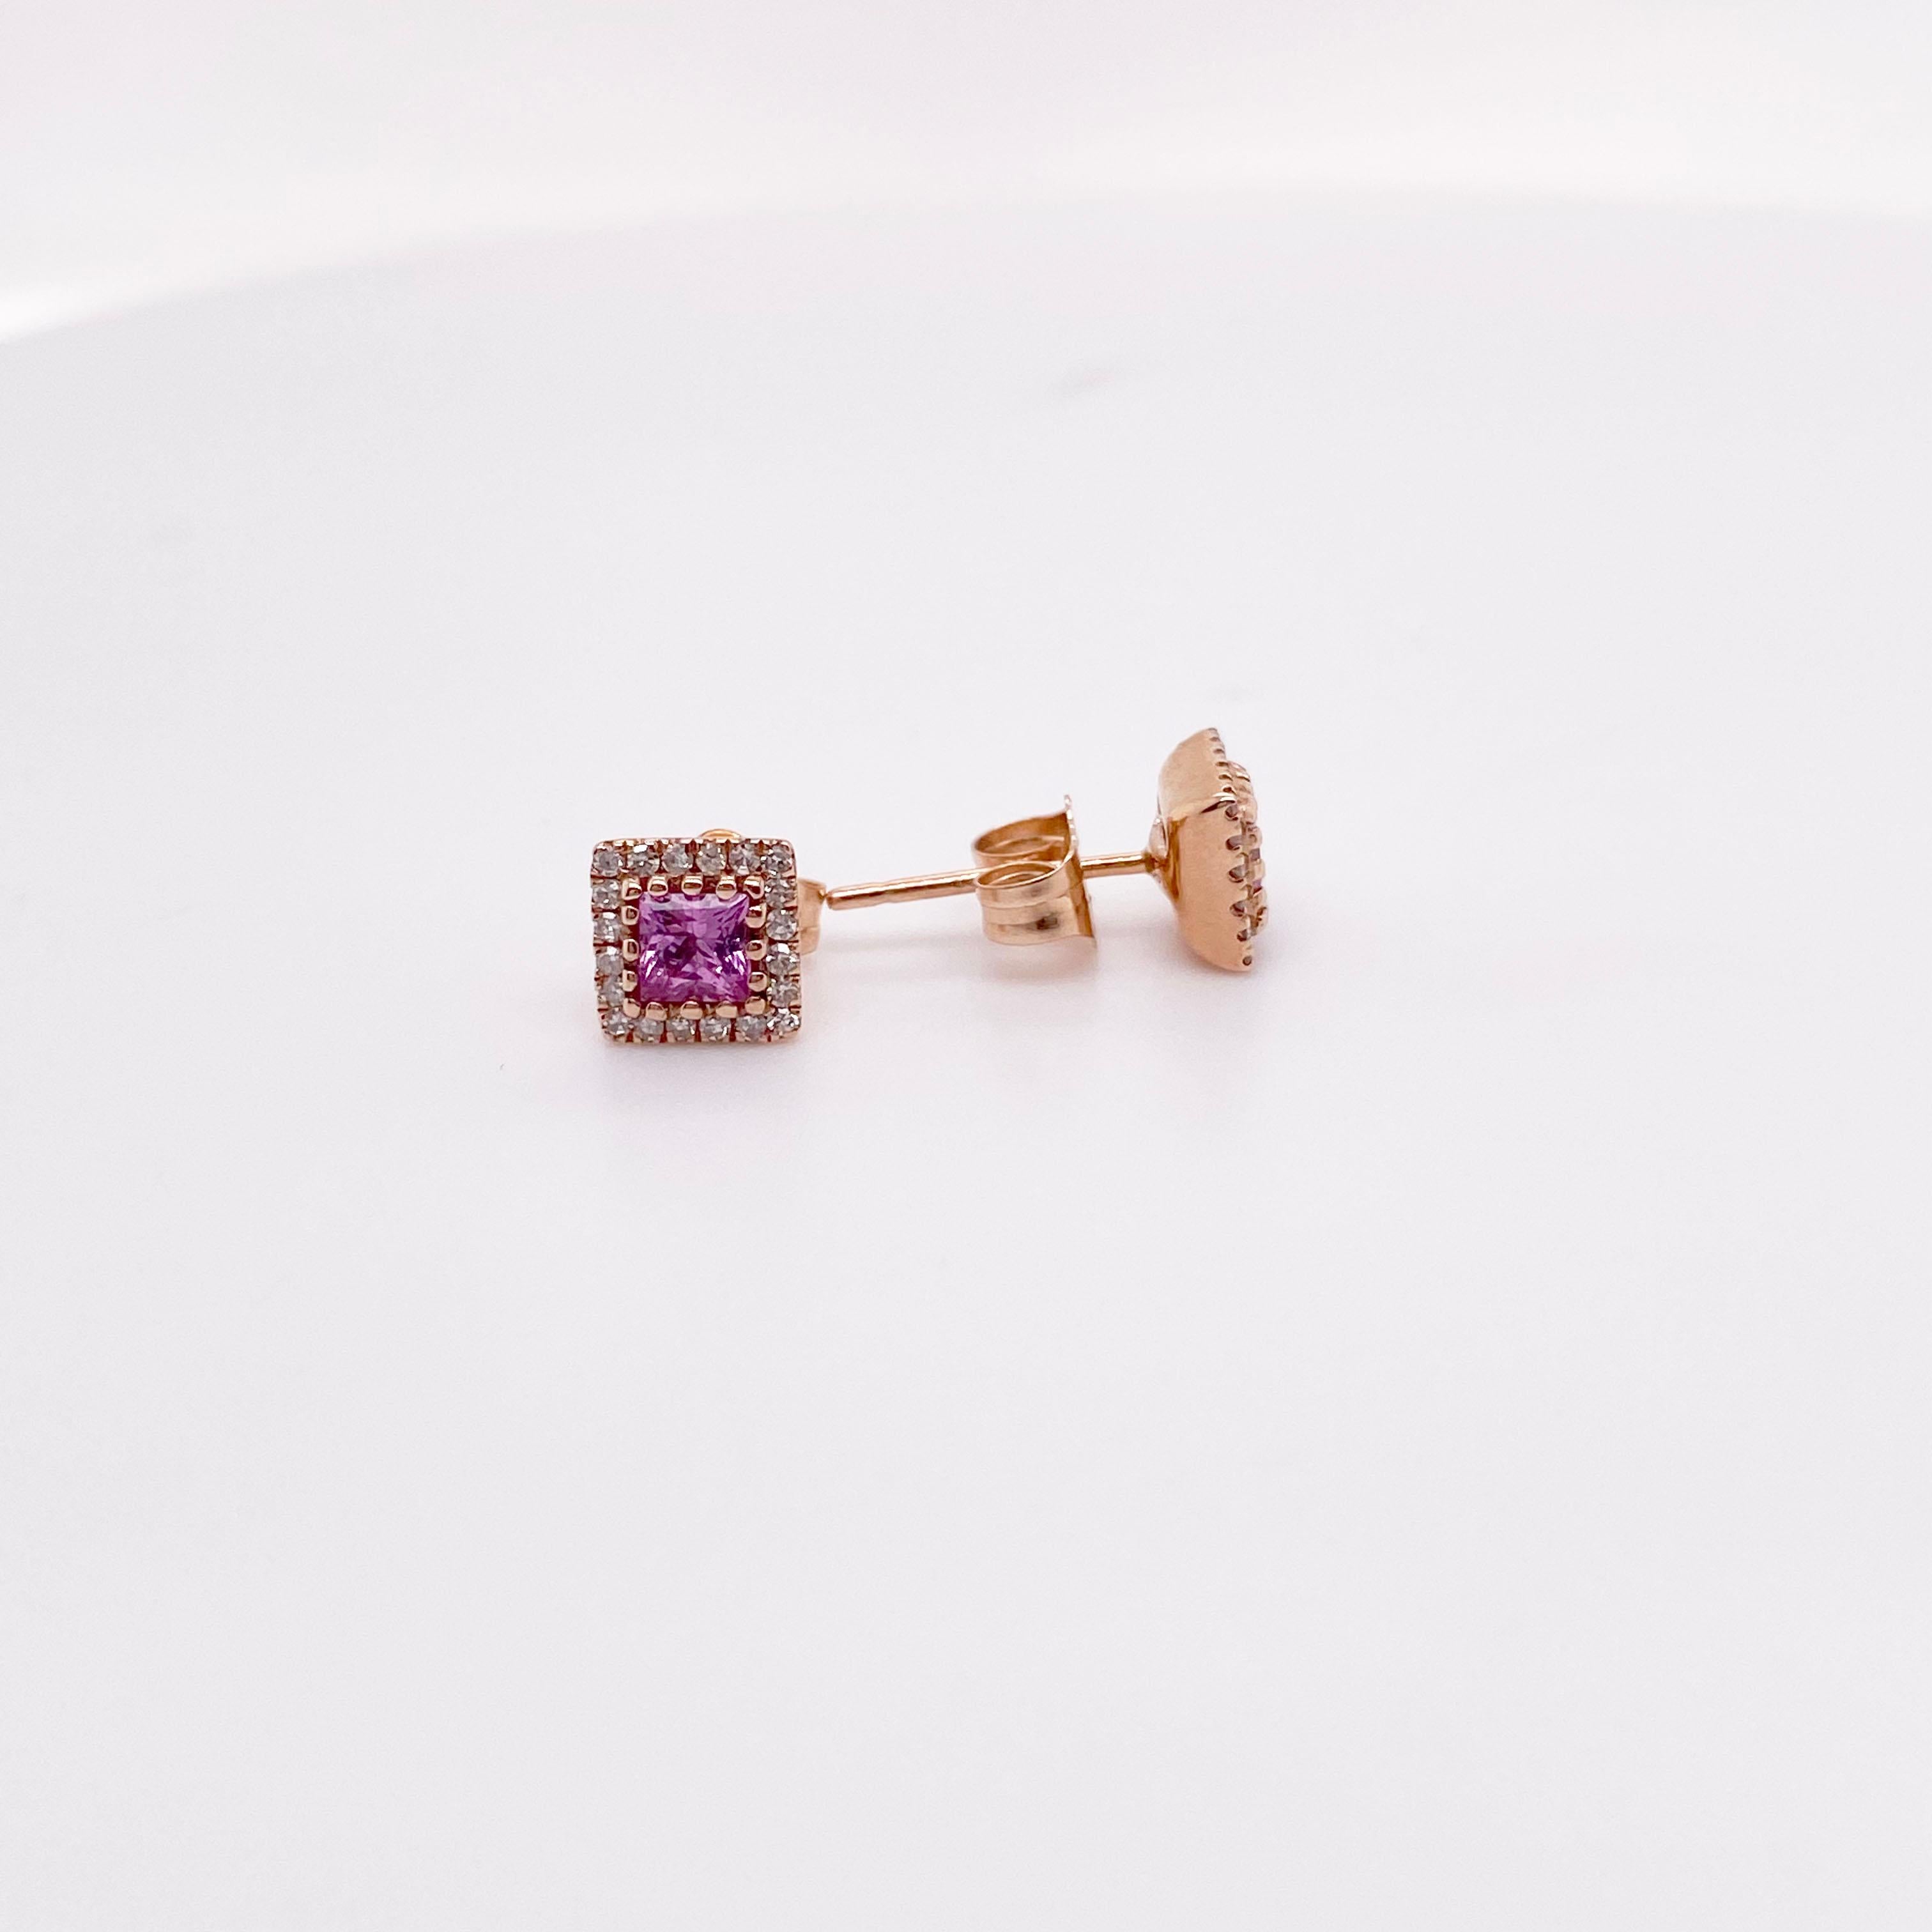 Square Cut Pink Sapphire Stud Earrings with Diamond Halo